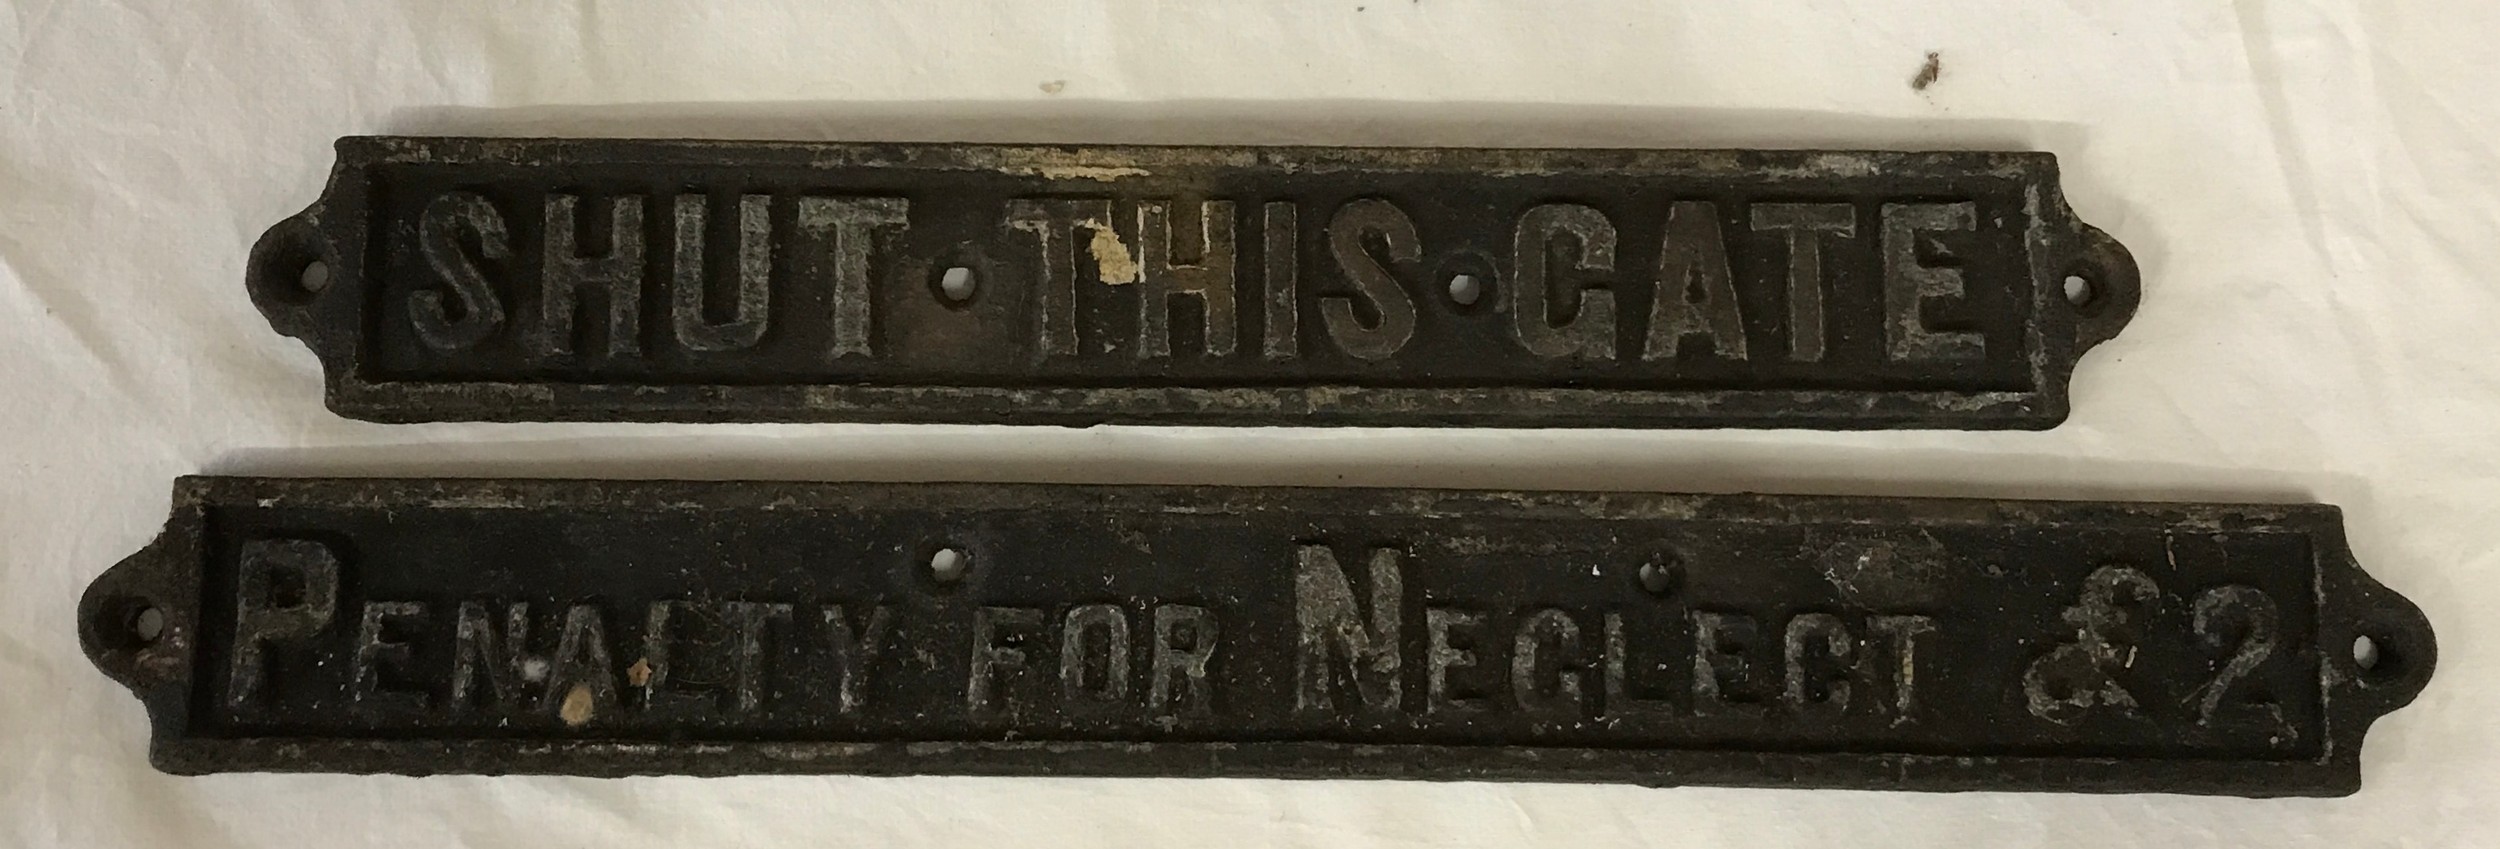 Two cast iron signs one reading "Penalty for neglect £2" and the other "Shut this gate" largest 53